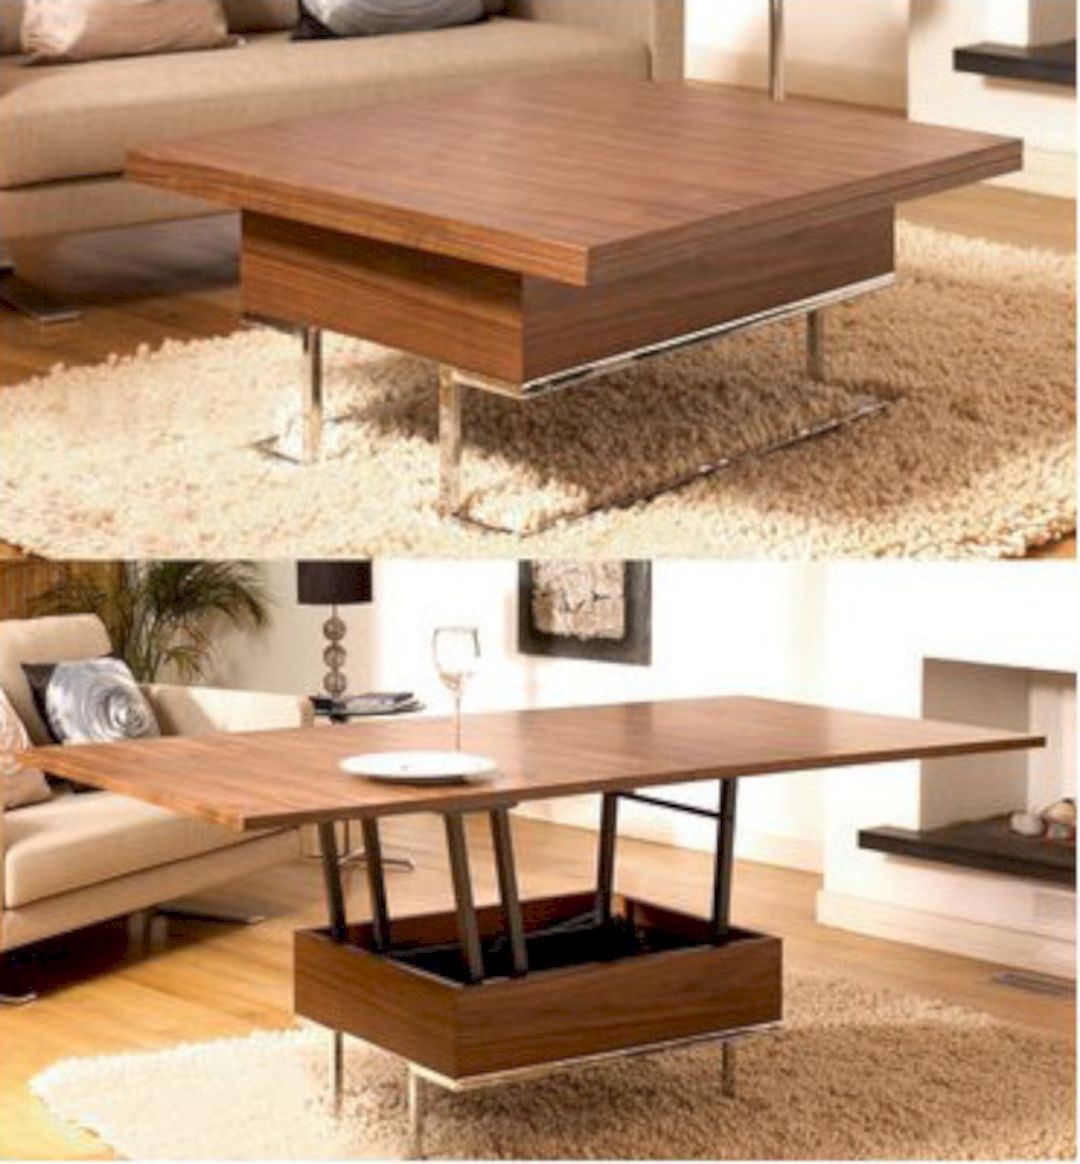 50 Amazing Convertible Coffee Table To, Turn Dining Room Table Into Coffee Table